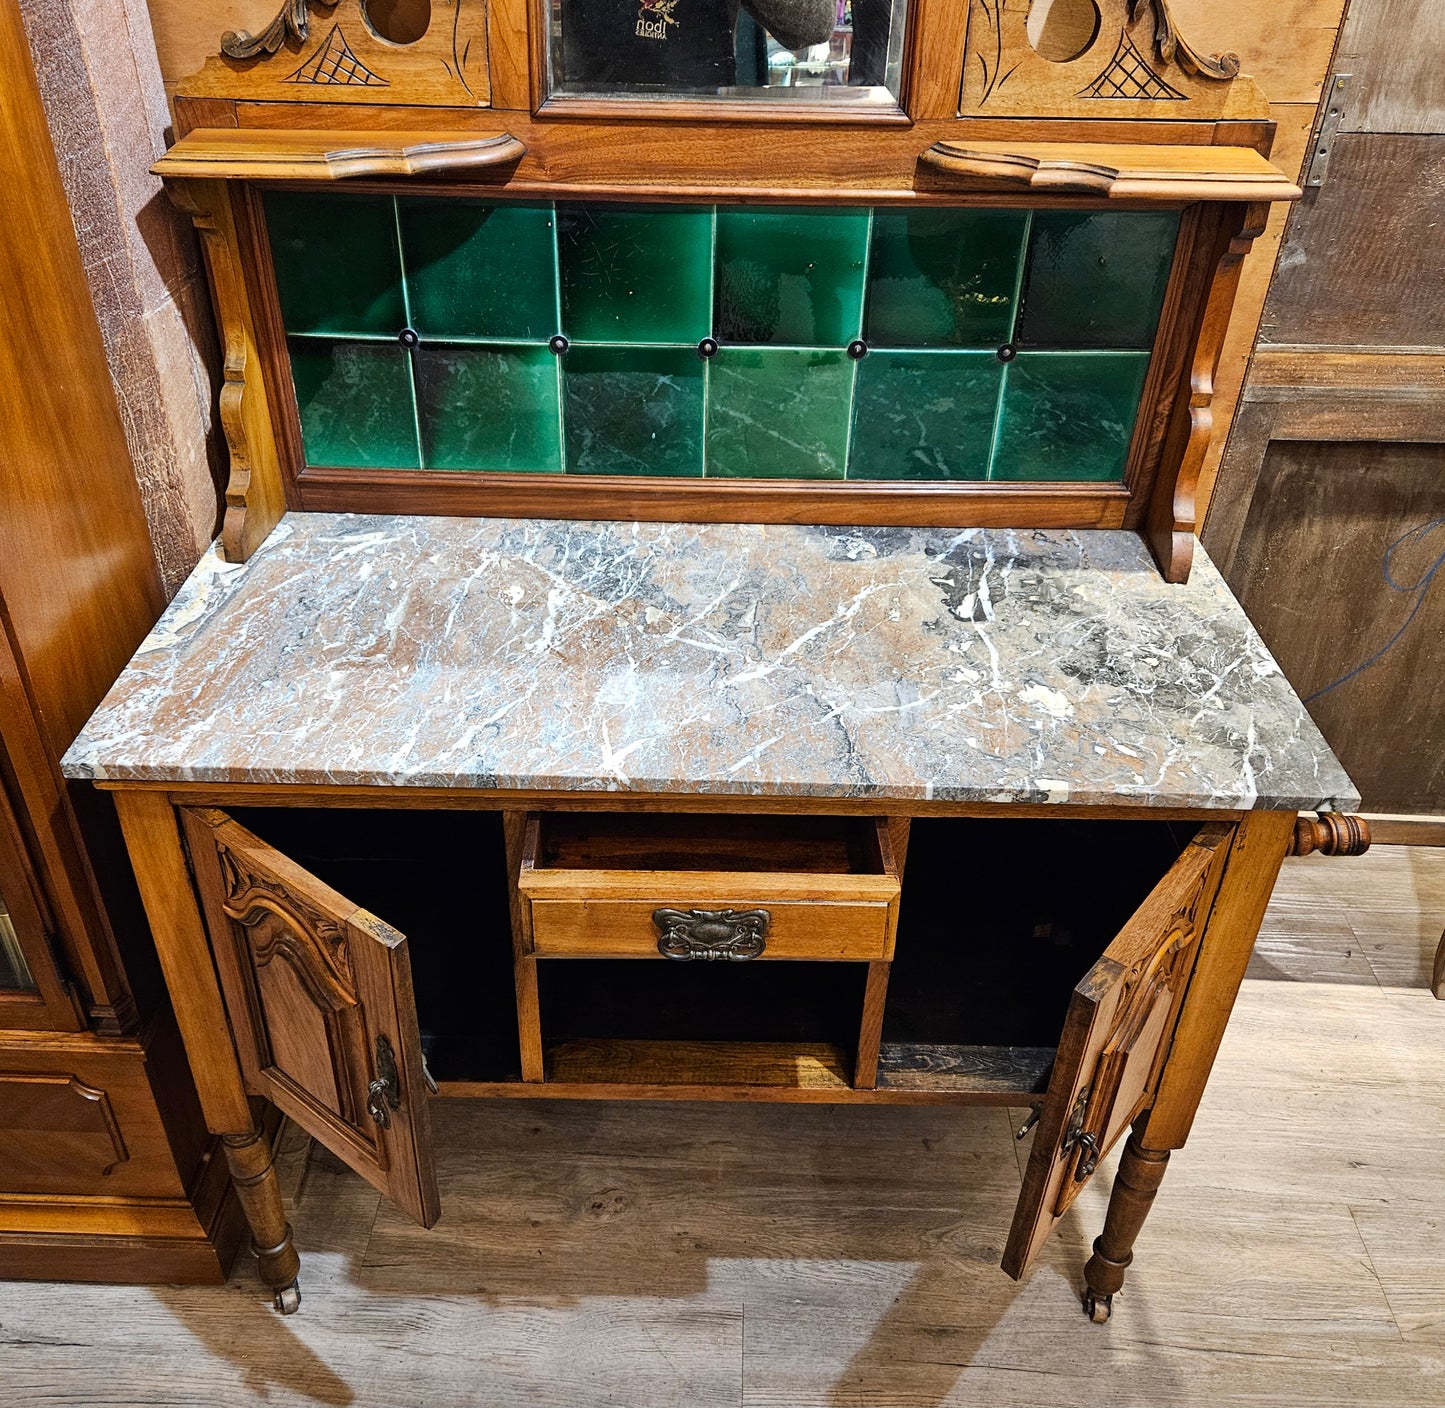 Antique marble top wash stand on wheels